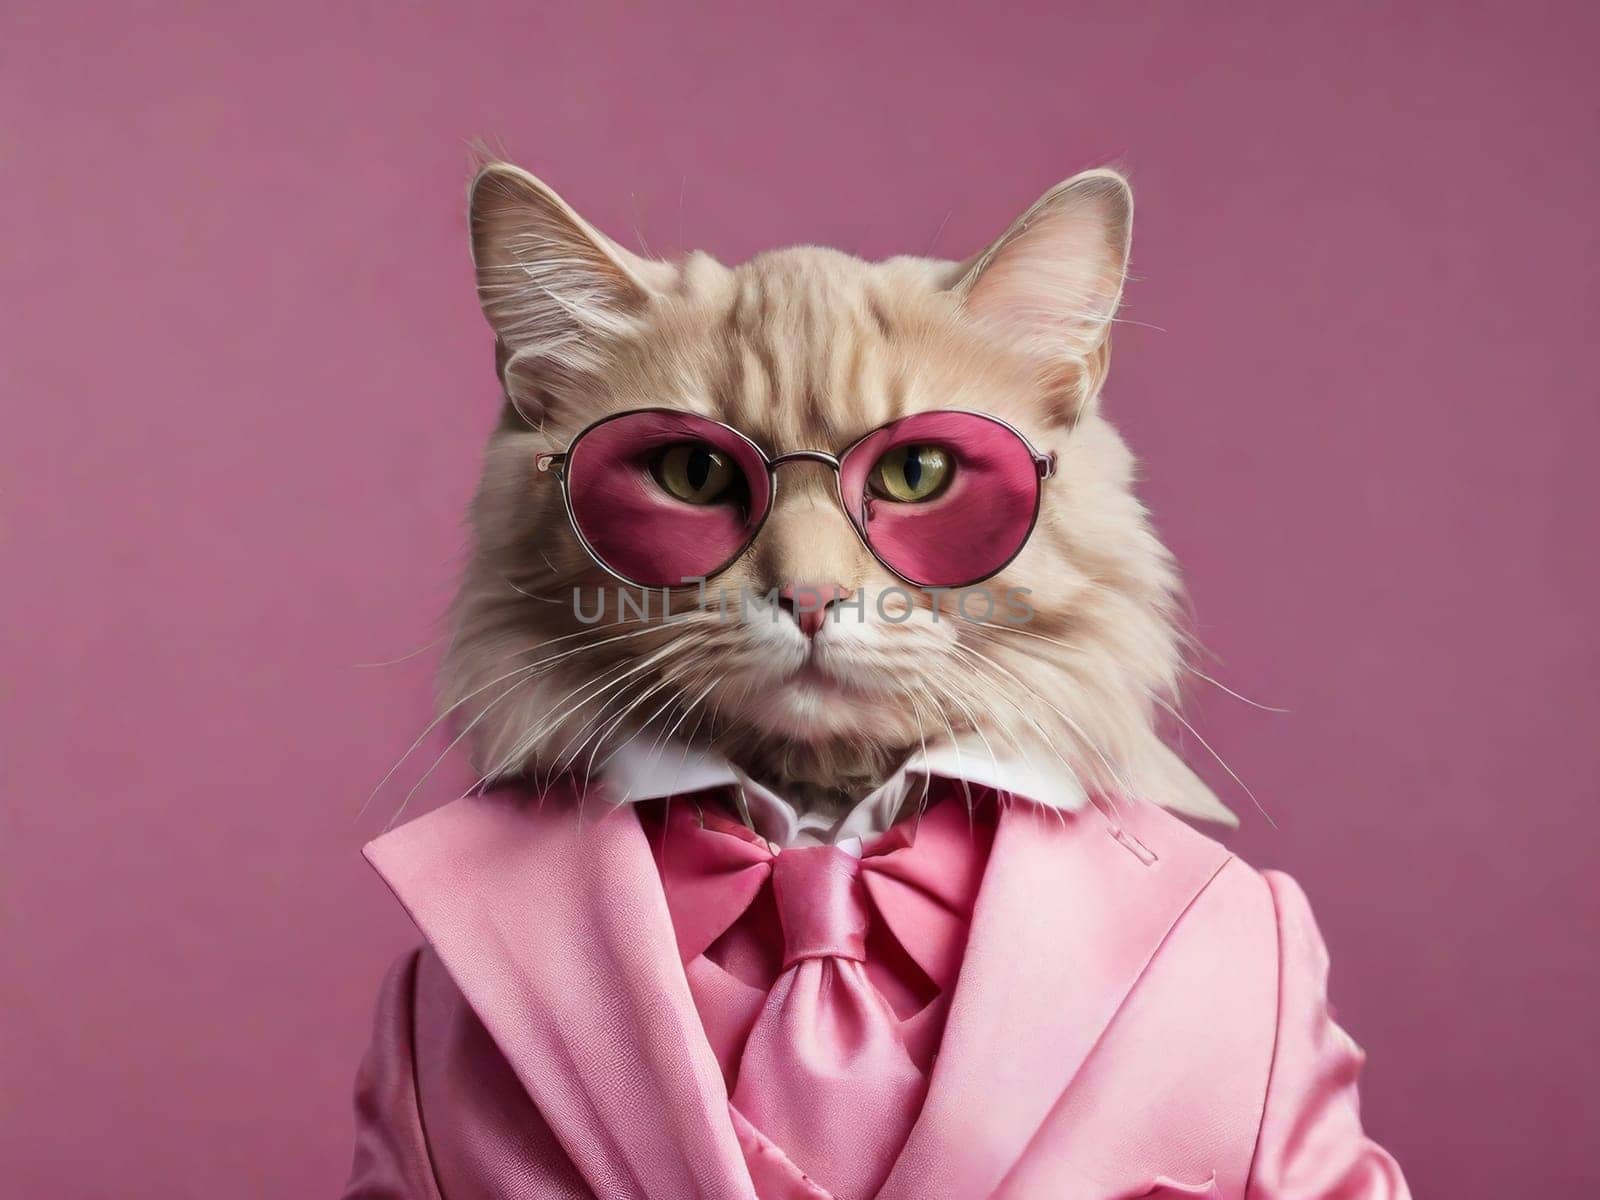 Business cat in a pink suit and glasses on a pink background by Ekaterina34